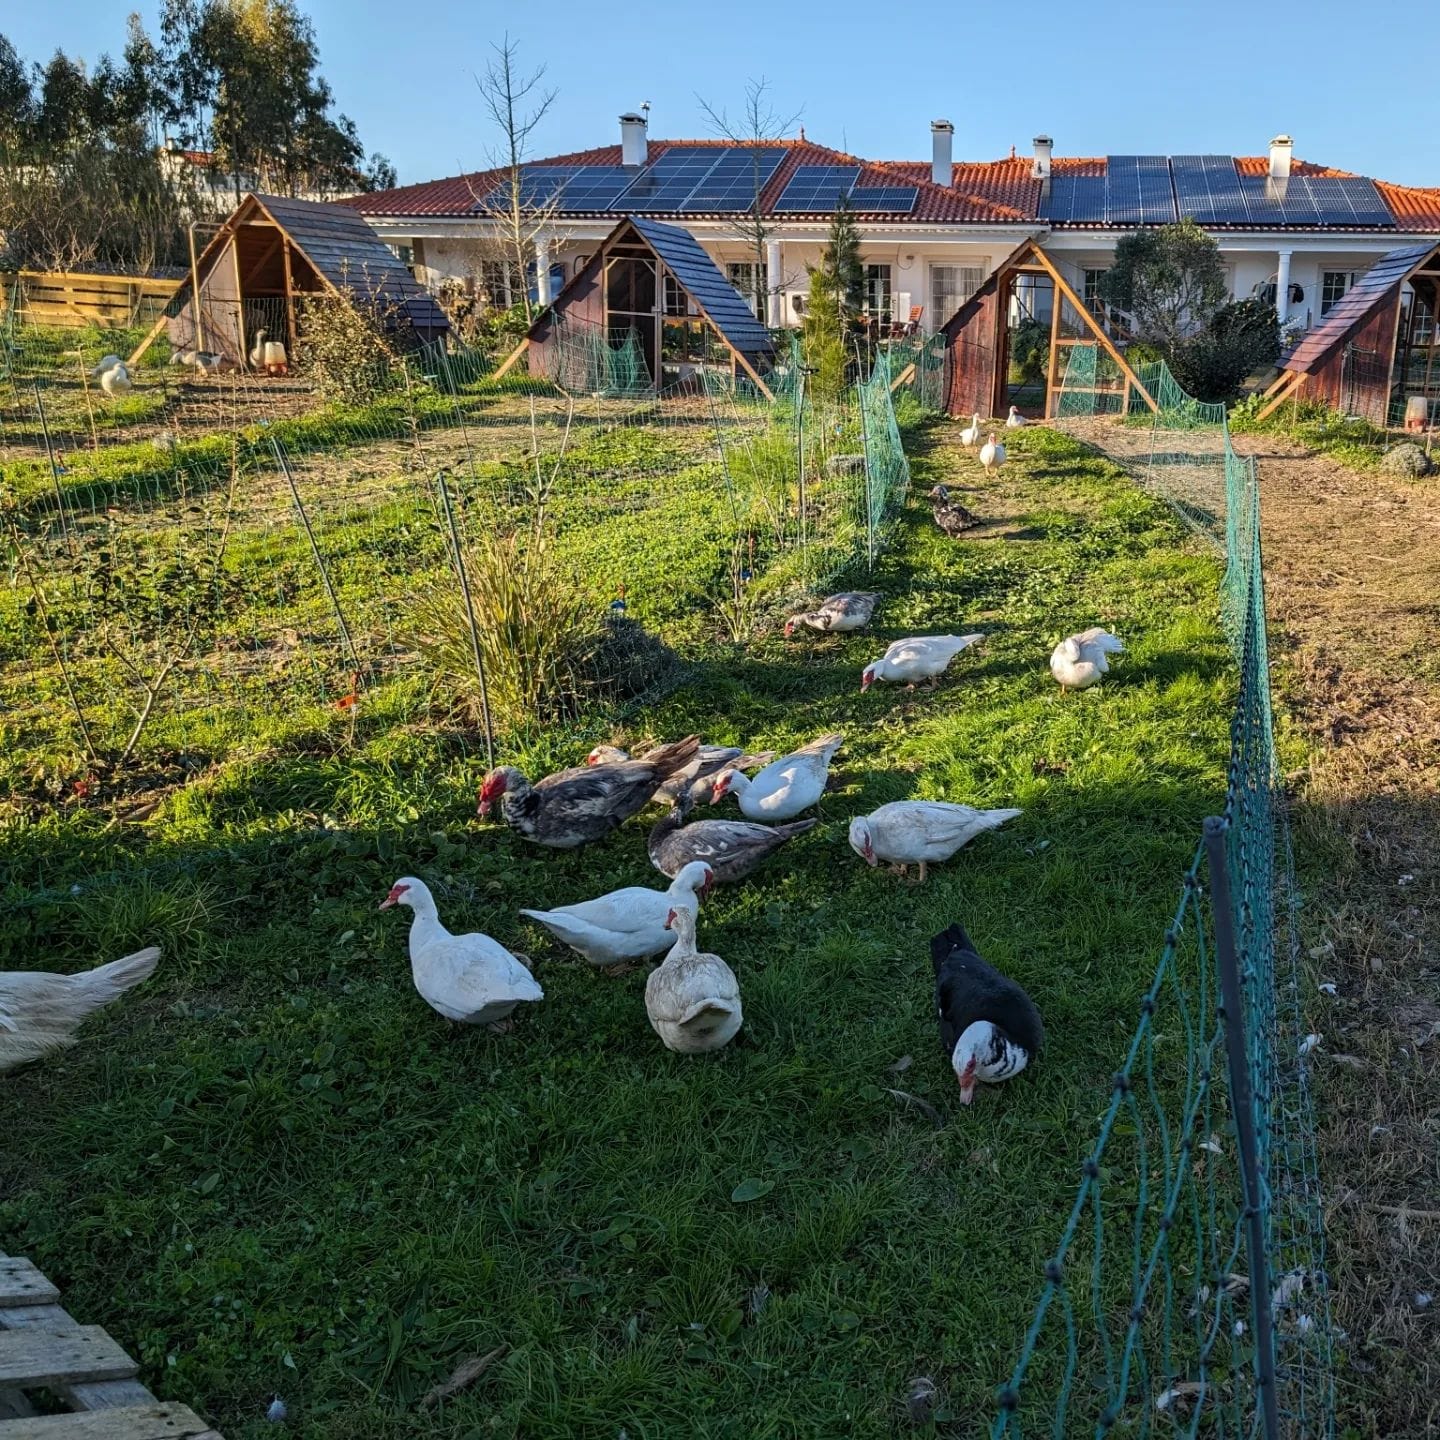 Moved the birds to fresh paddocks